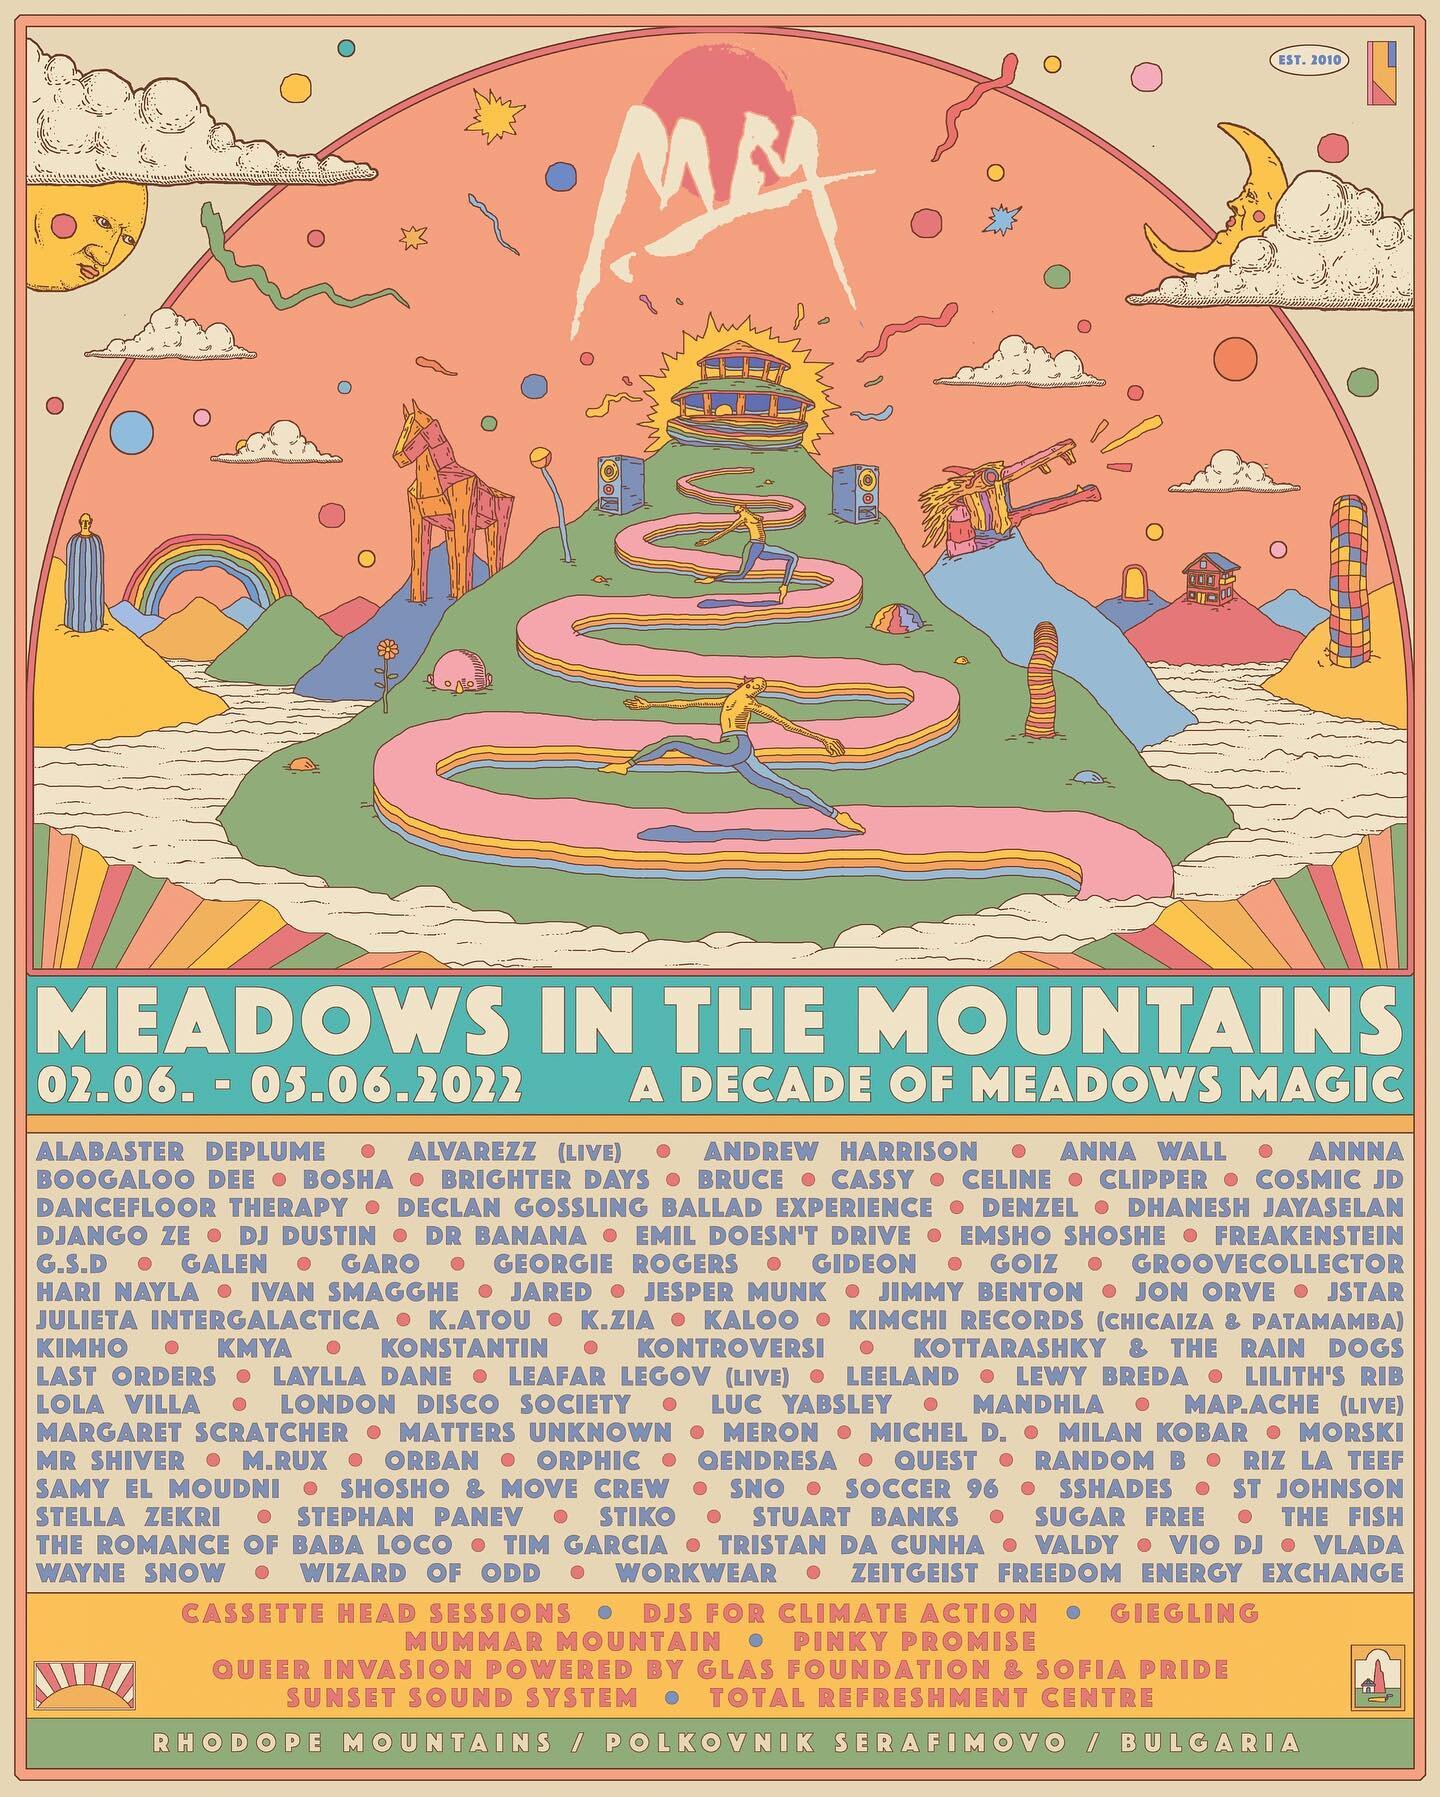 From a small party to an international arts community advancing environmental education and justice, we&rsquo;re excited to be a part of @MeadowsInTheMountains as the festival returns this weekend with an amazing lineup and an even stronger mission t